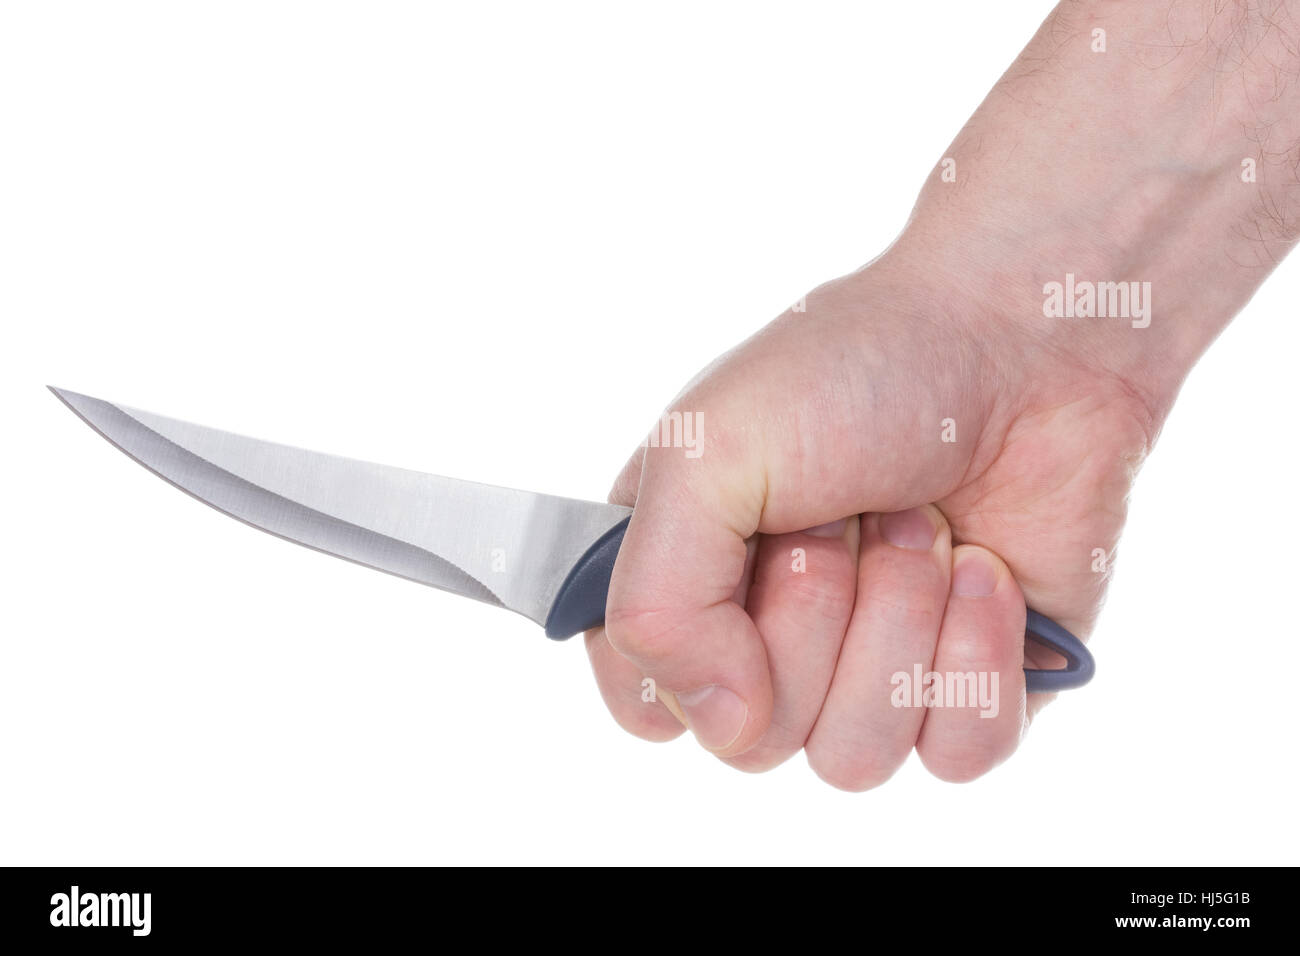 conflict, crime, attack, assault, stab, arm, weapon, knive, knife, hand, Stock Photo